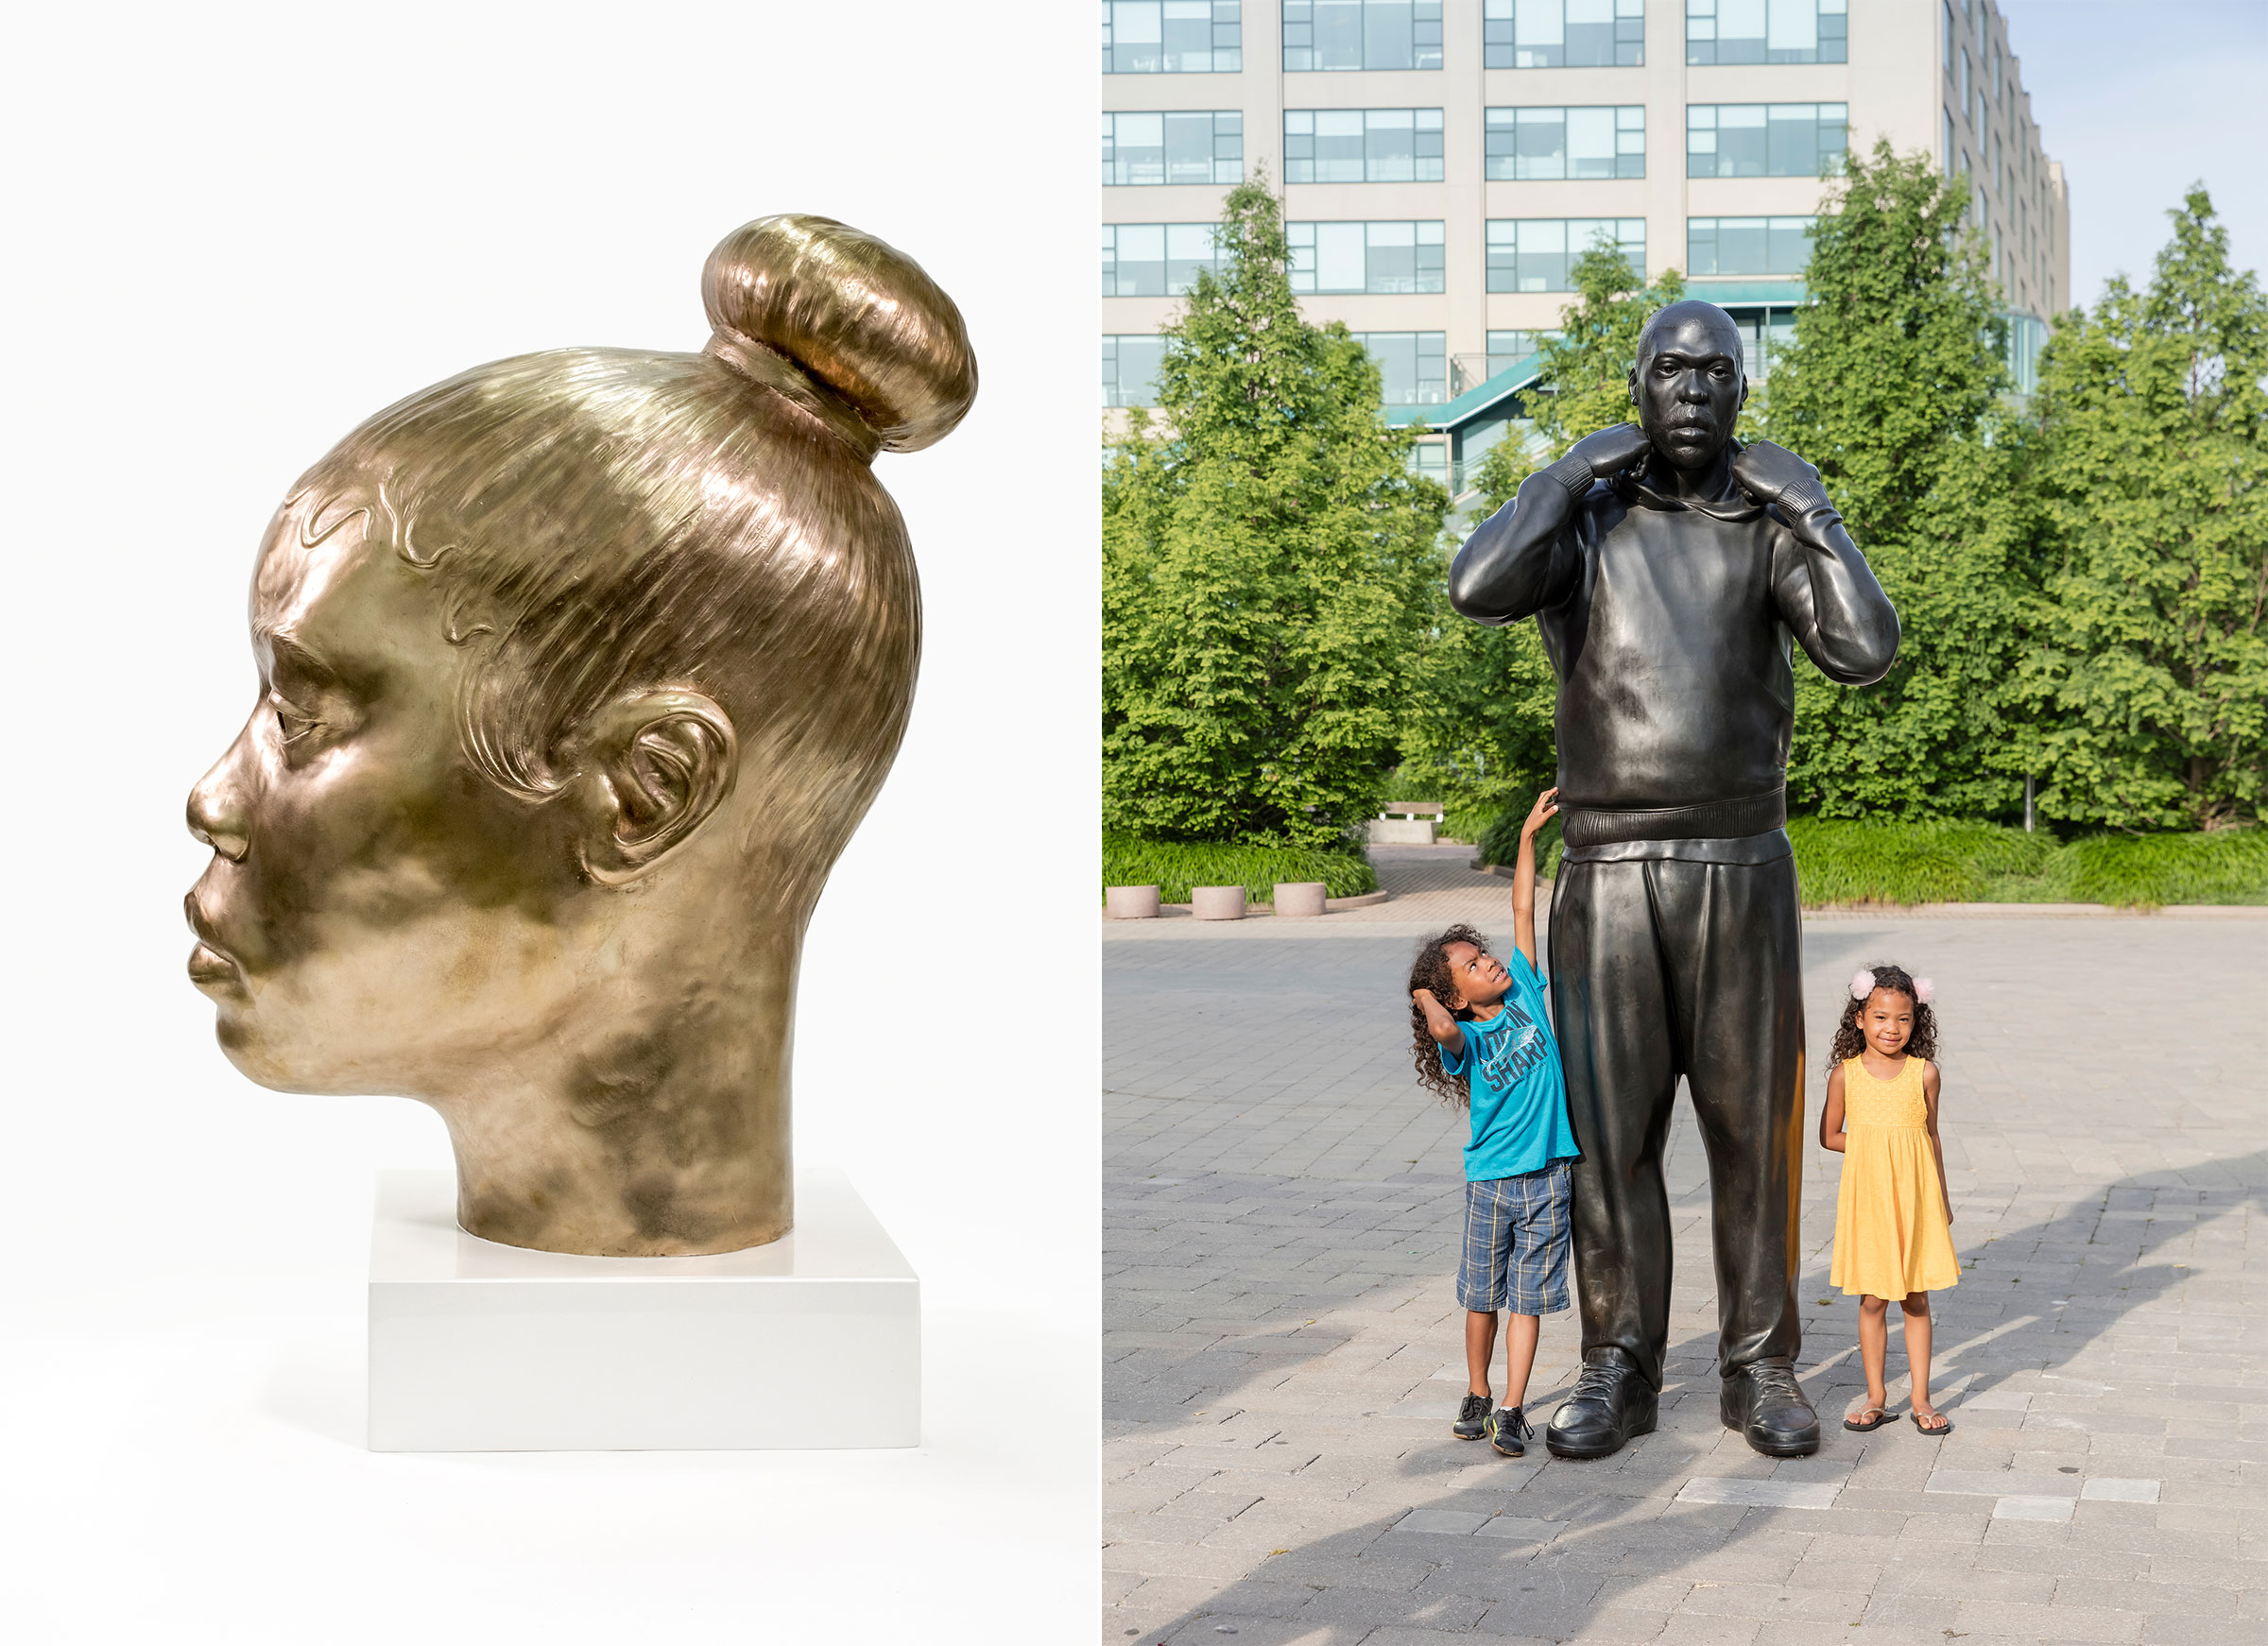 Sculptures by Thomas Price Left: "Lay It Down (On The Edge Of Beauty)", 2018, Thomas J Price; Right: "Cover Up (The Reveal)", 2019, Thomas J Price